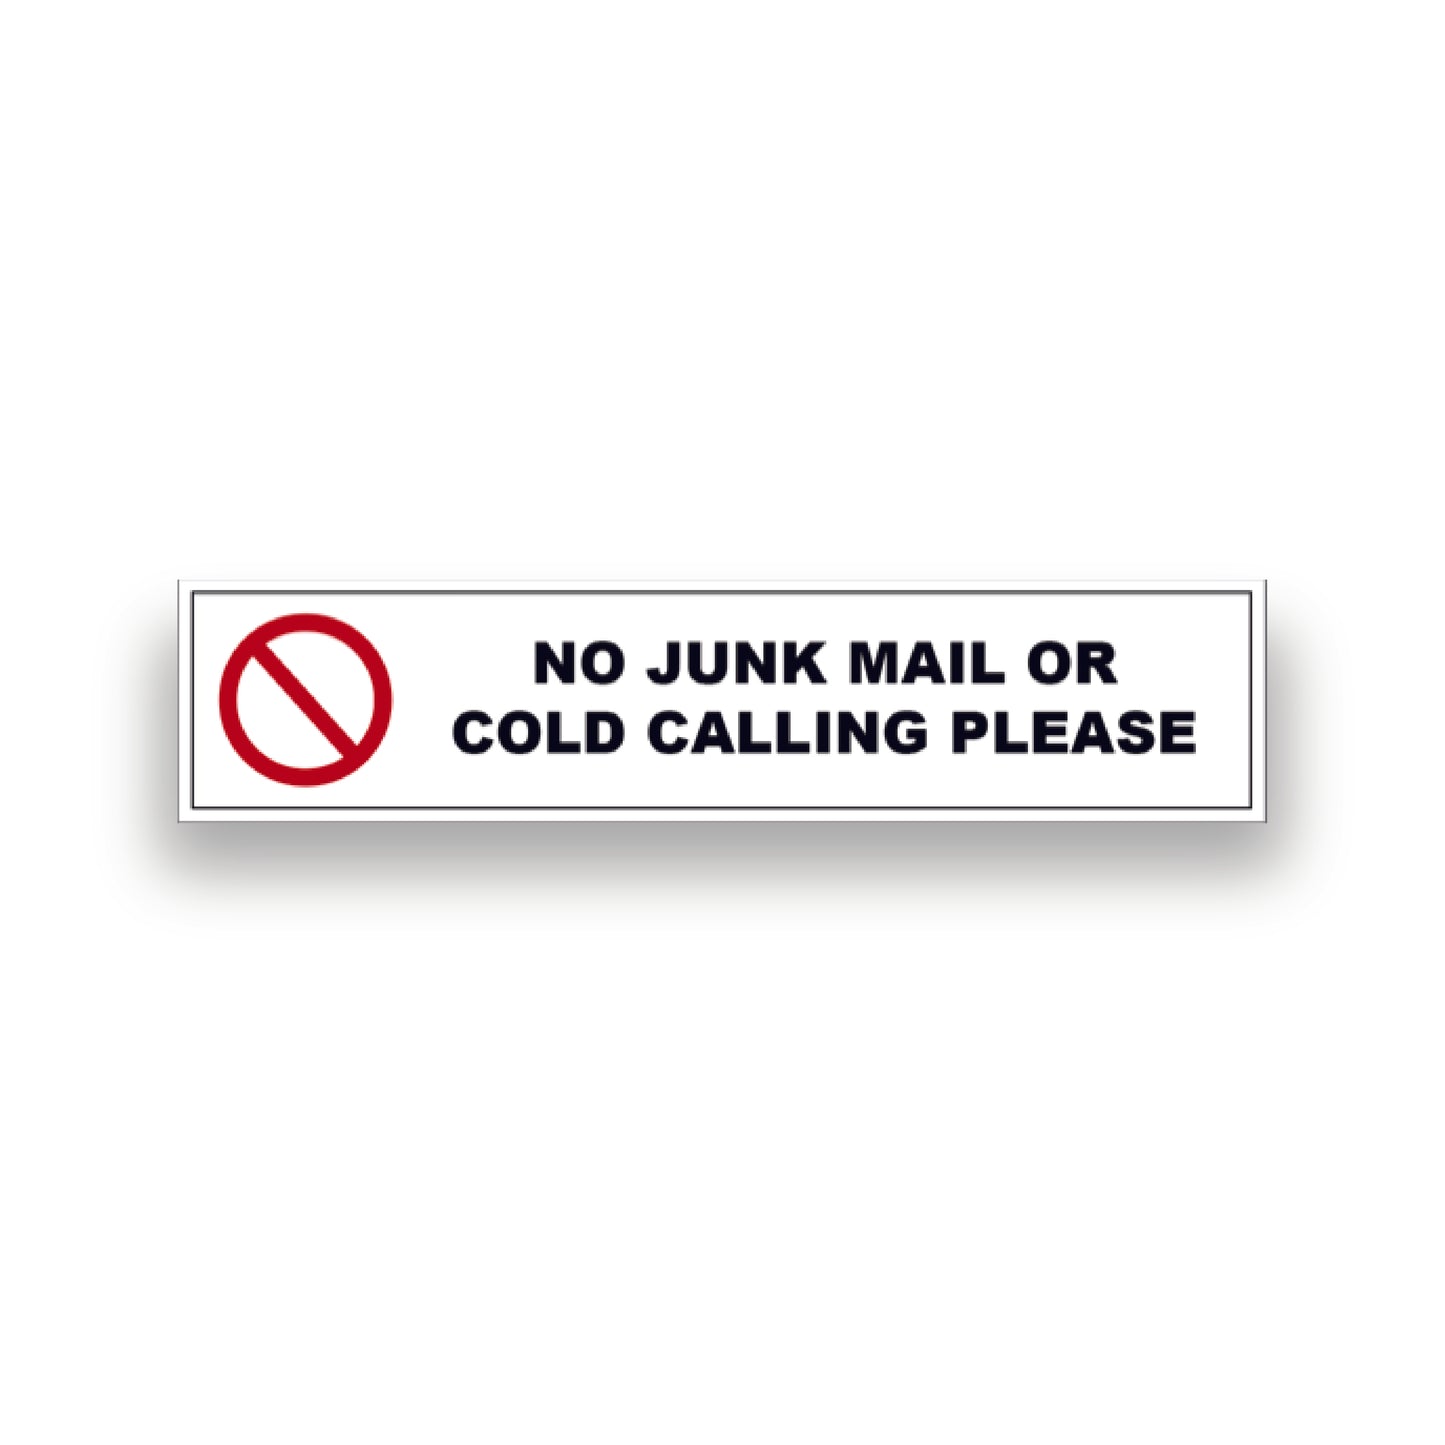 No Junk Mail, No Cold Callers, No Leaflets, Letterbox, Junk, Stickers, Sign,Door